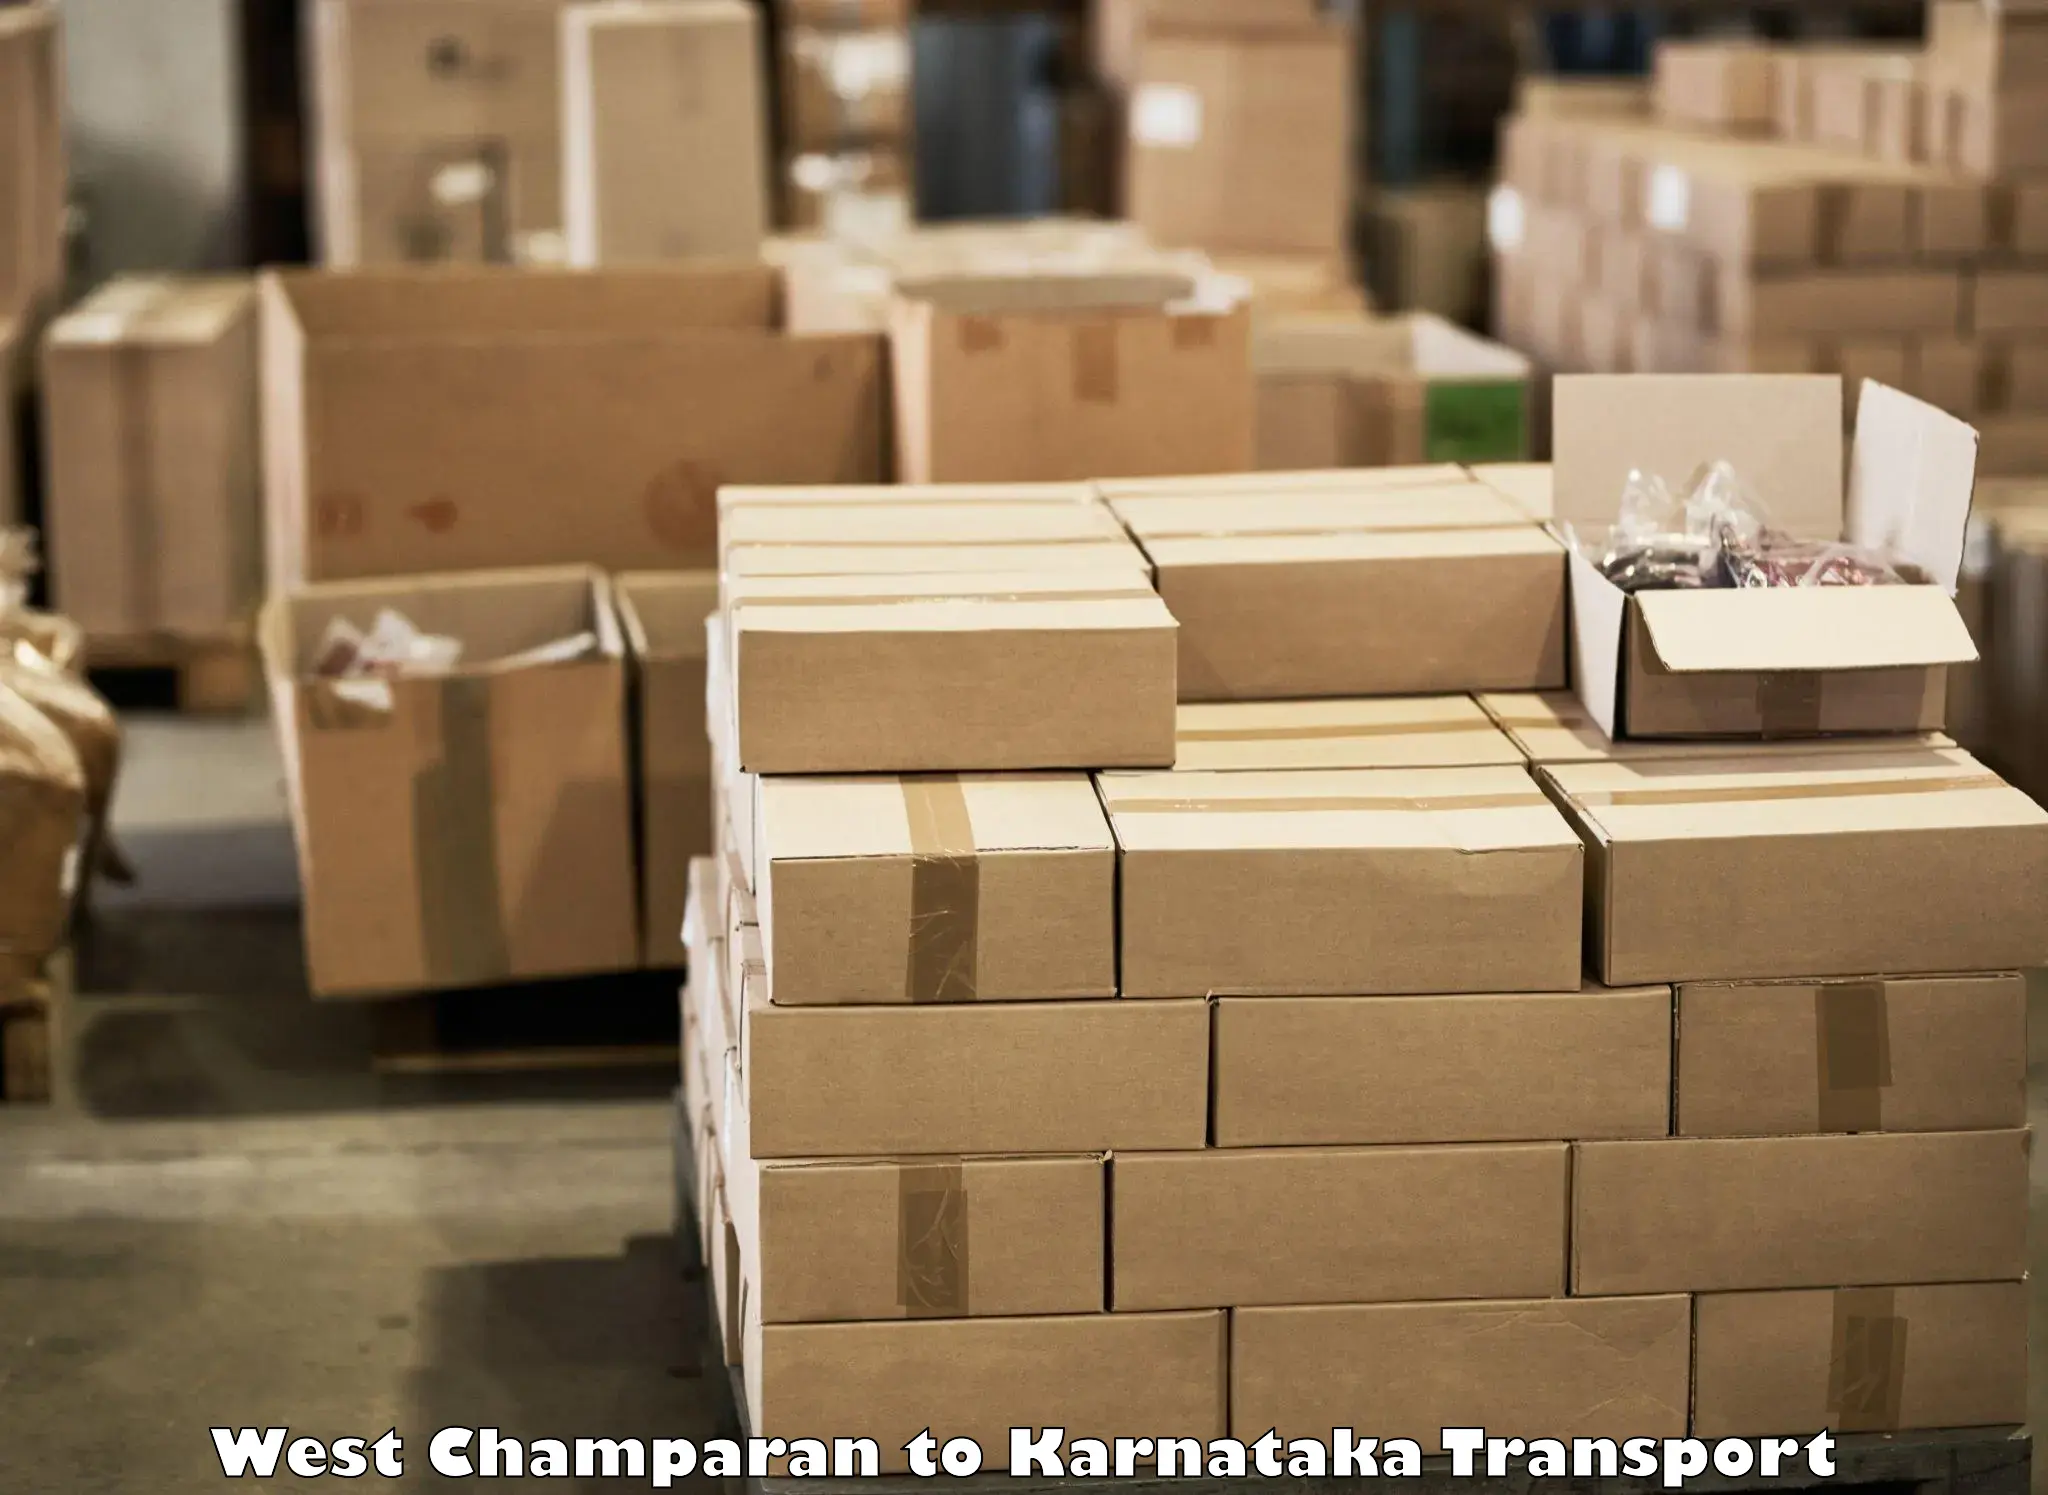 Daily parcel service transport West Champaran to Devanahalli